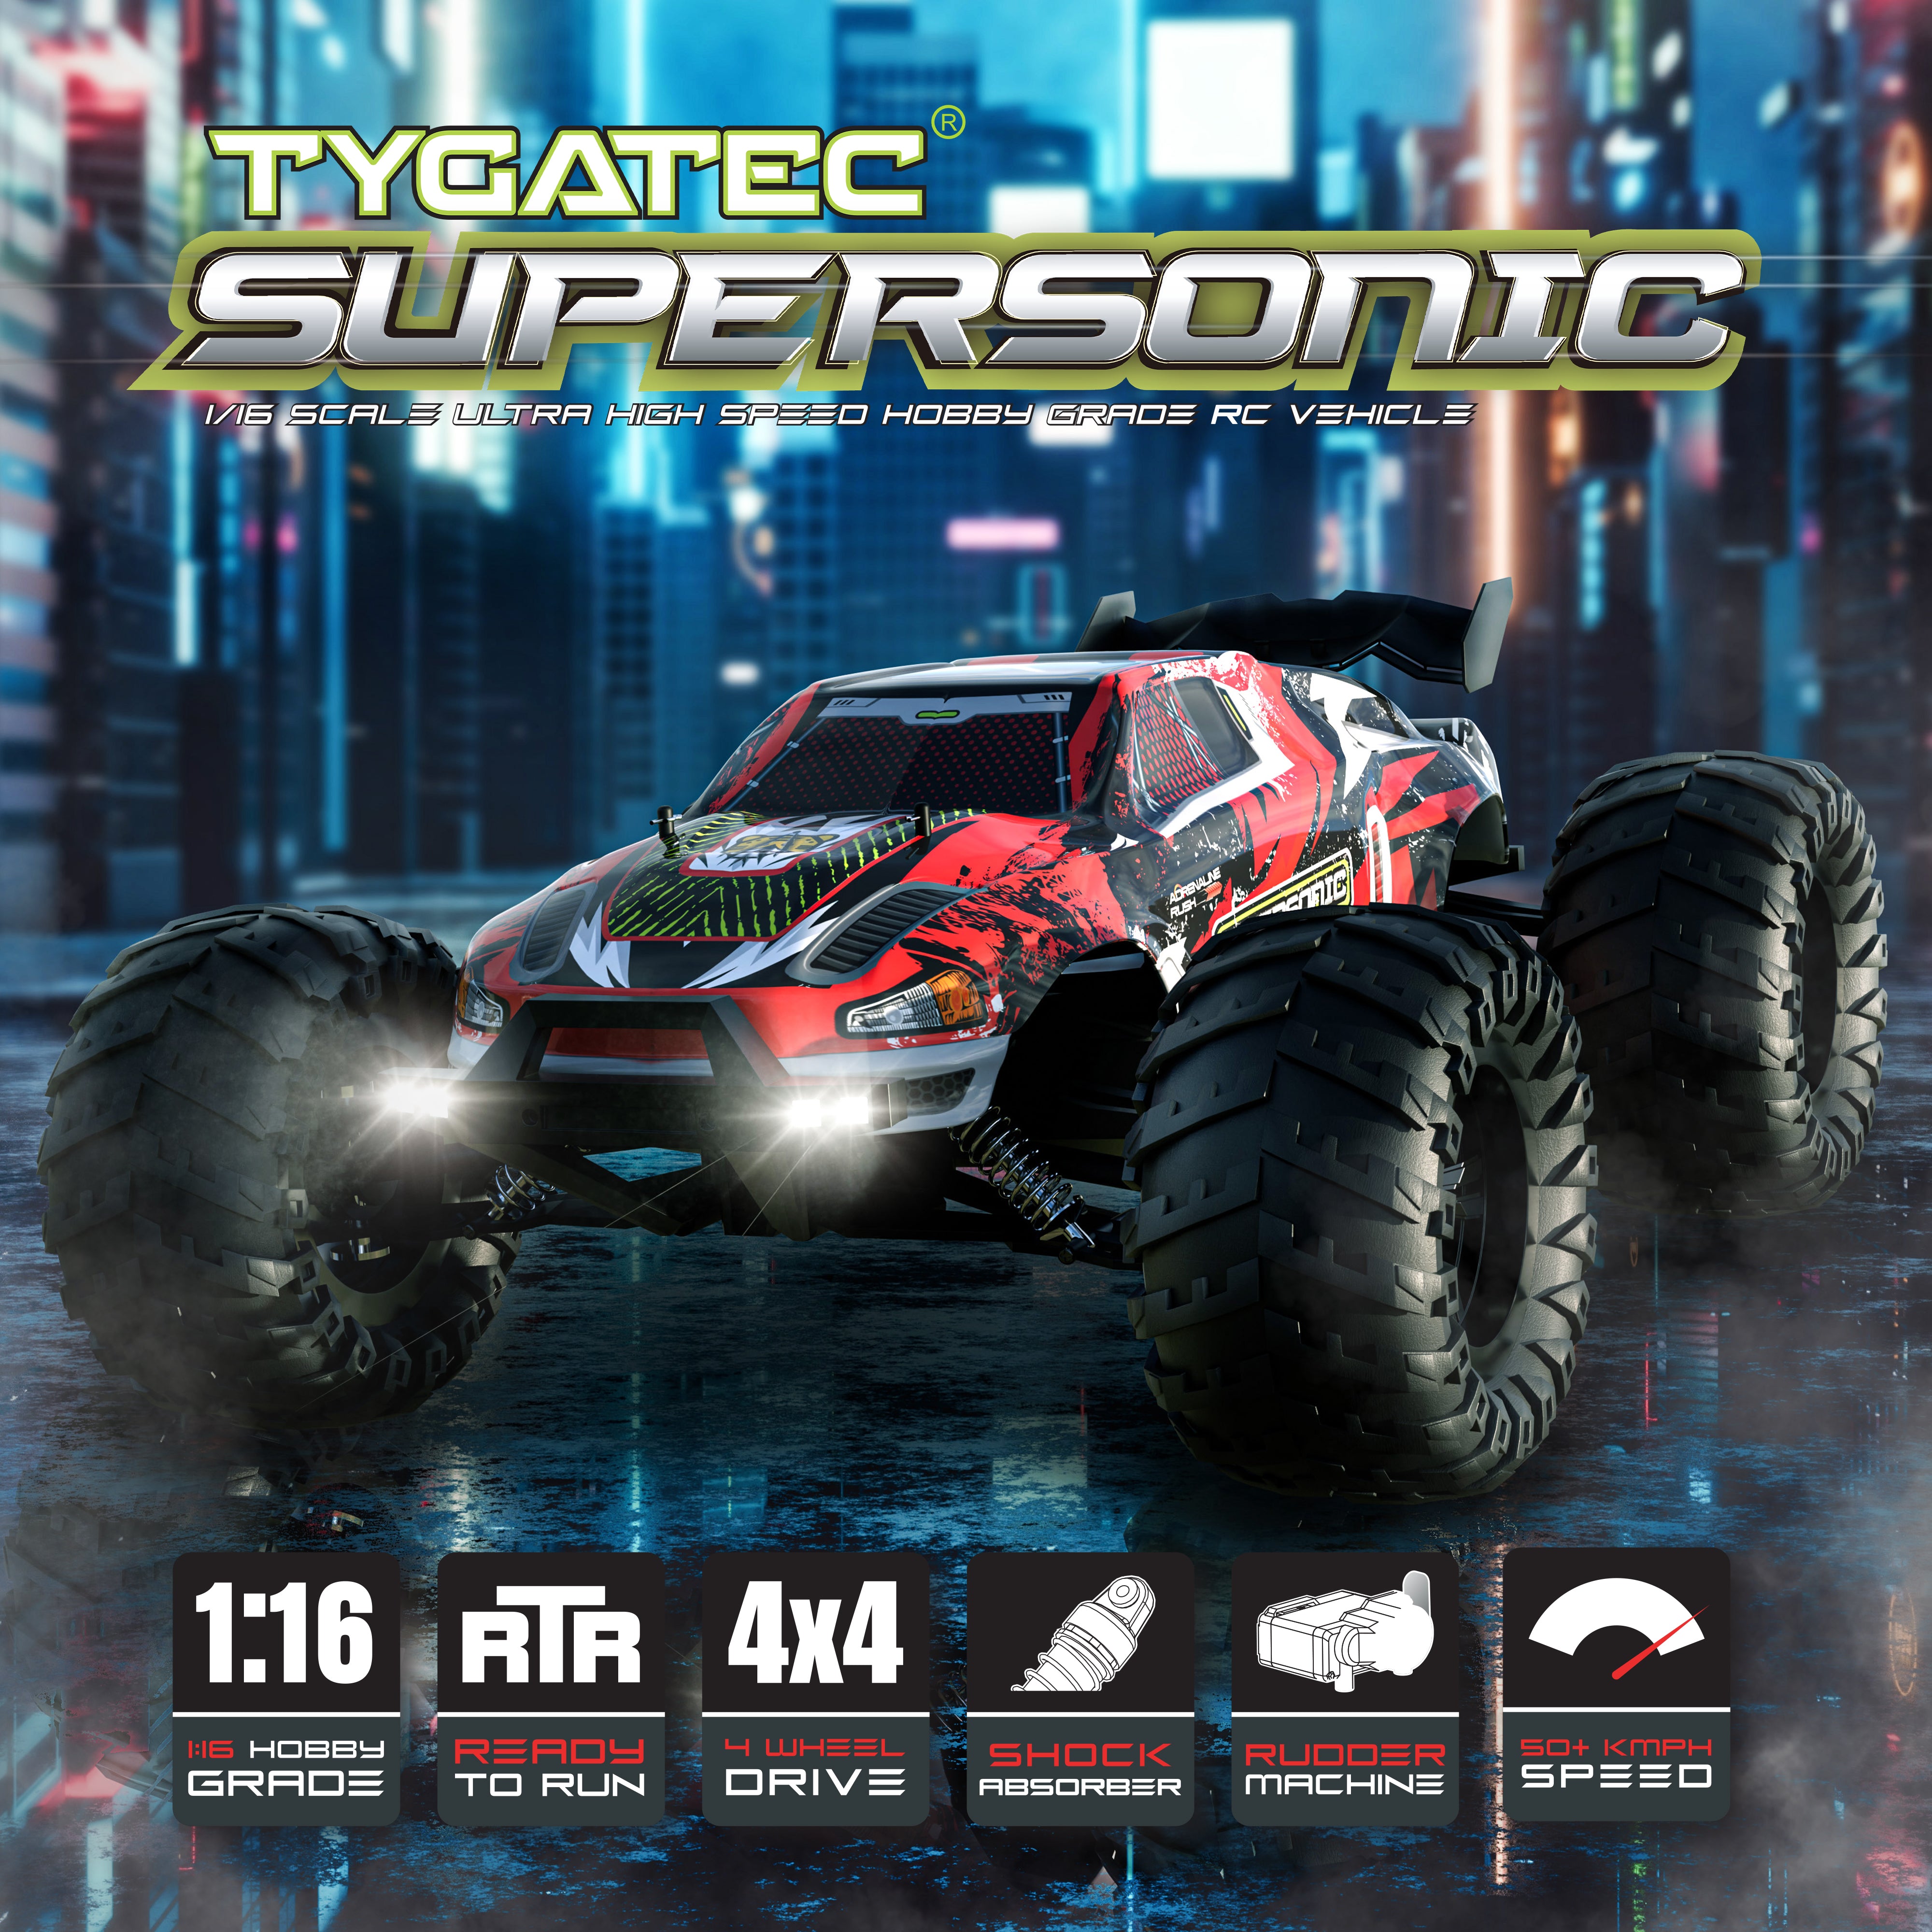 TYGATEC SUPERSONIC HIGH SPEED  REMOTE CONTROL (RC) CAR FOR KIDS | HOBBY GRADE STUNT CAR (Color Red)